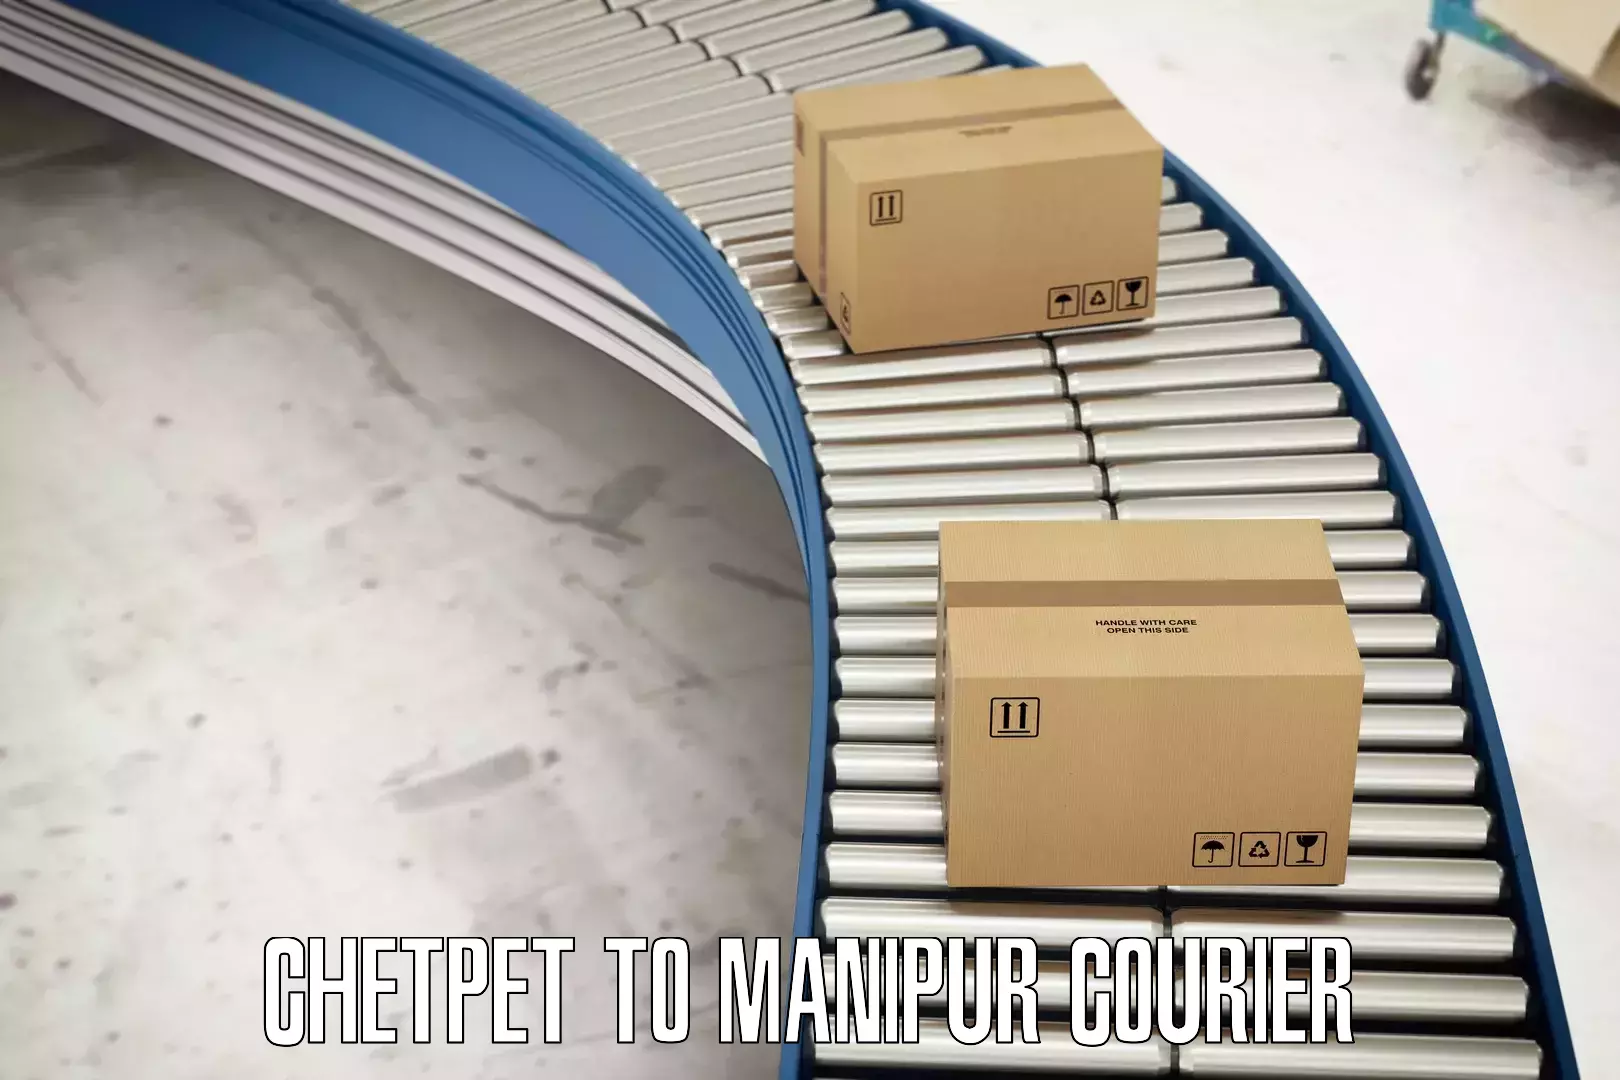 High-priority parcel service Chetpet to Manipur